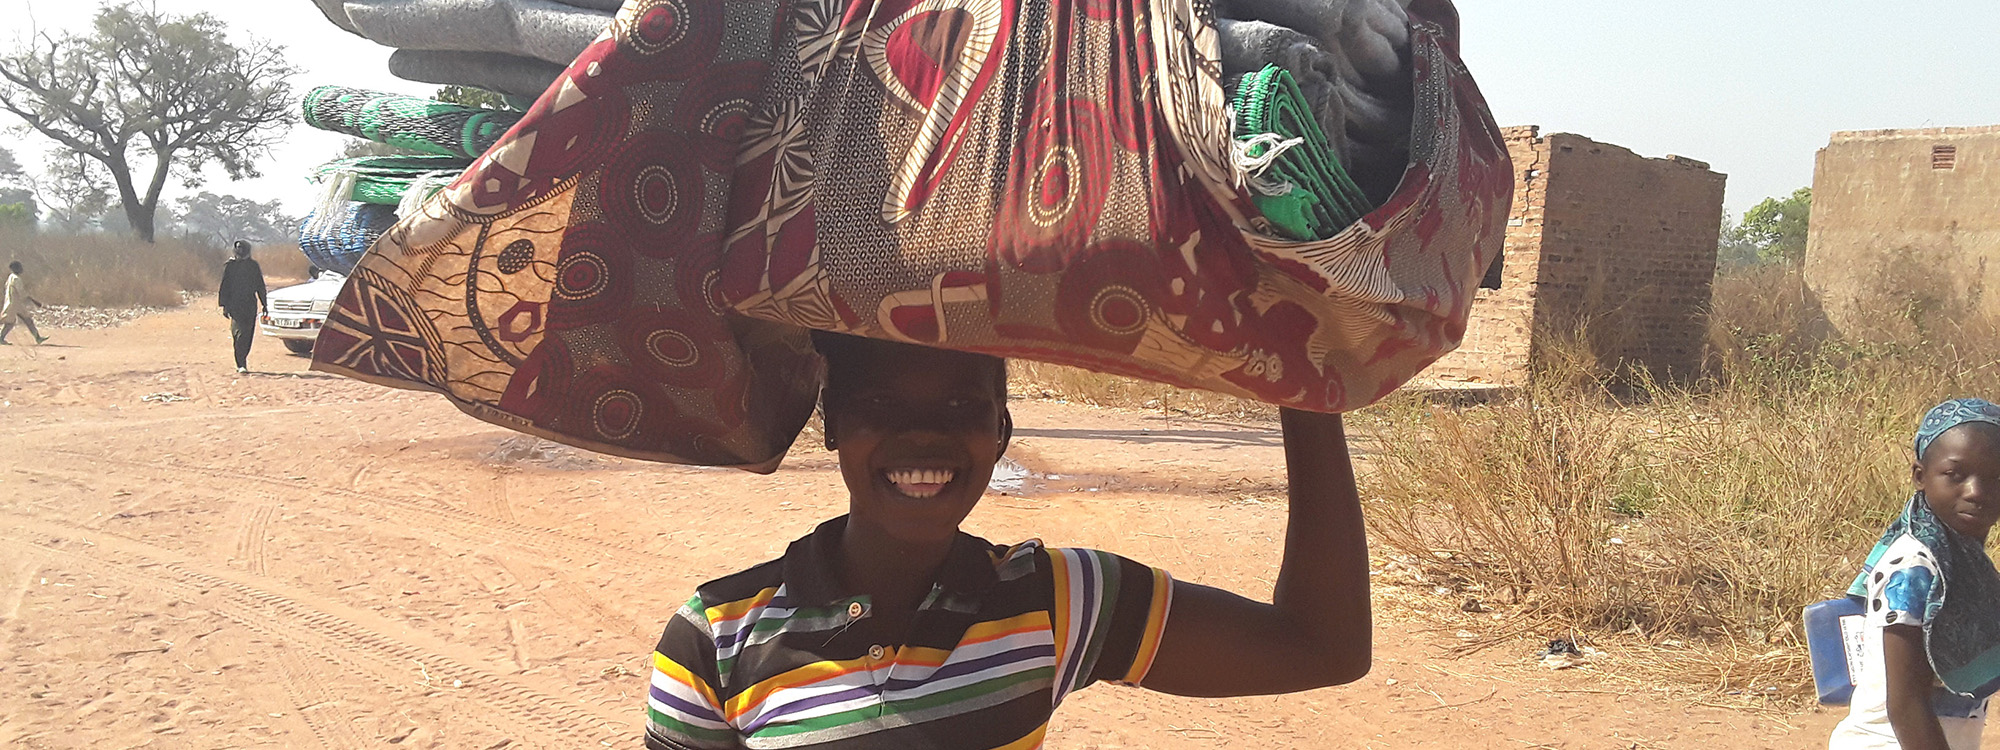 Lady with carrying large bundle on her head